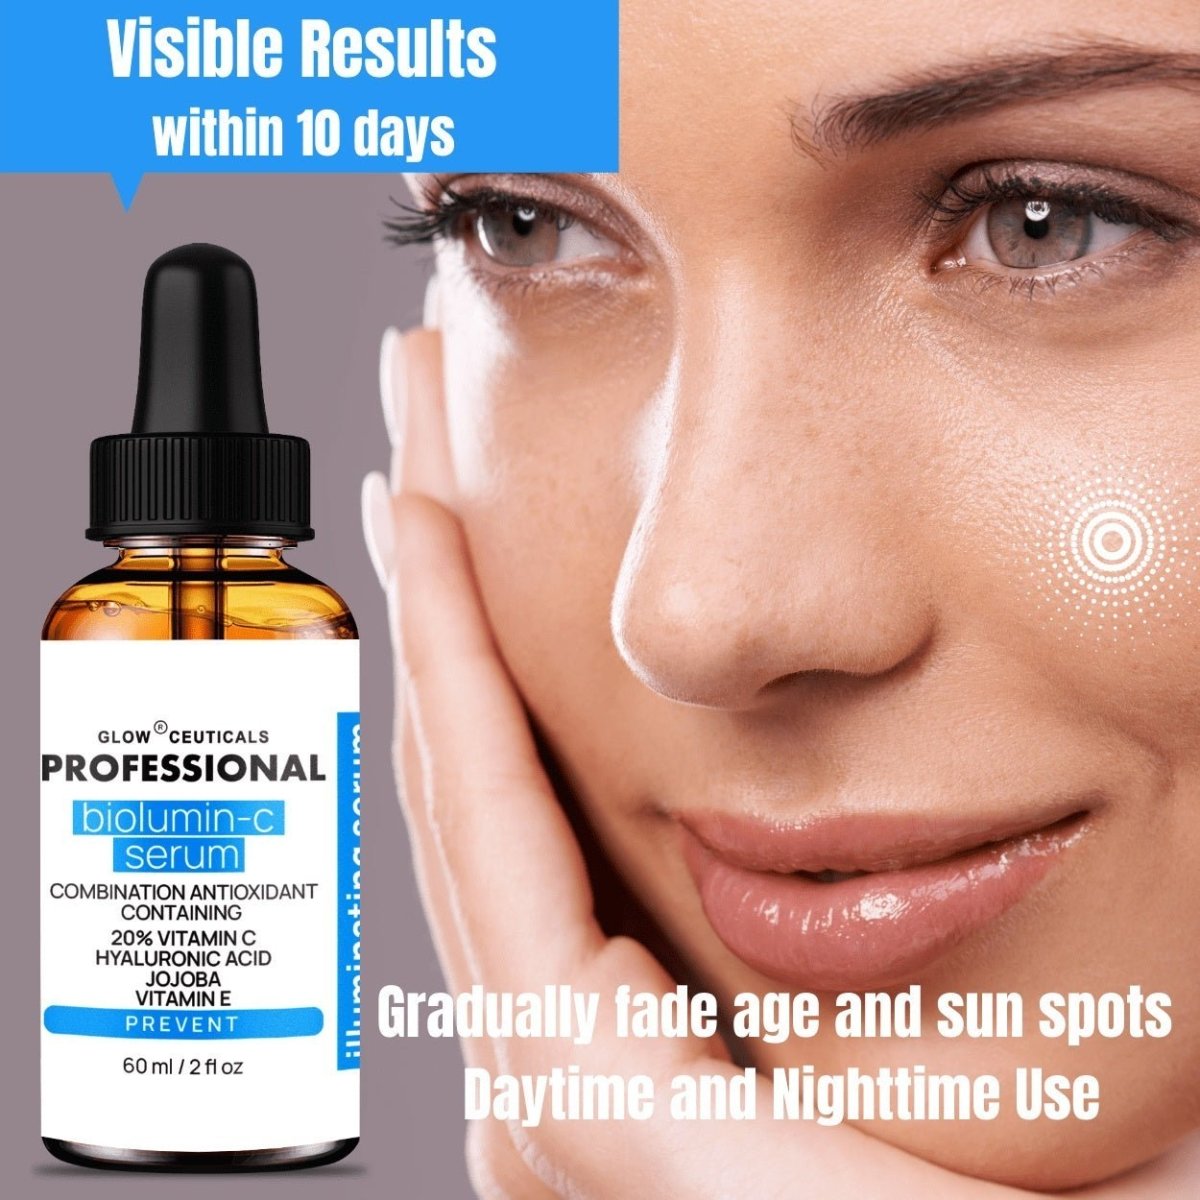 Vitamin C Serum Concentrate 20% - Ultimate Skin Renewal - Potent Anti-Aging Formula for Brighter, Firmer, and Radiant Skin | 60ml | 2-Pack